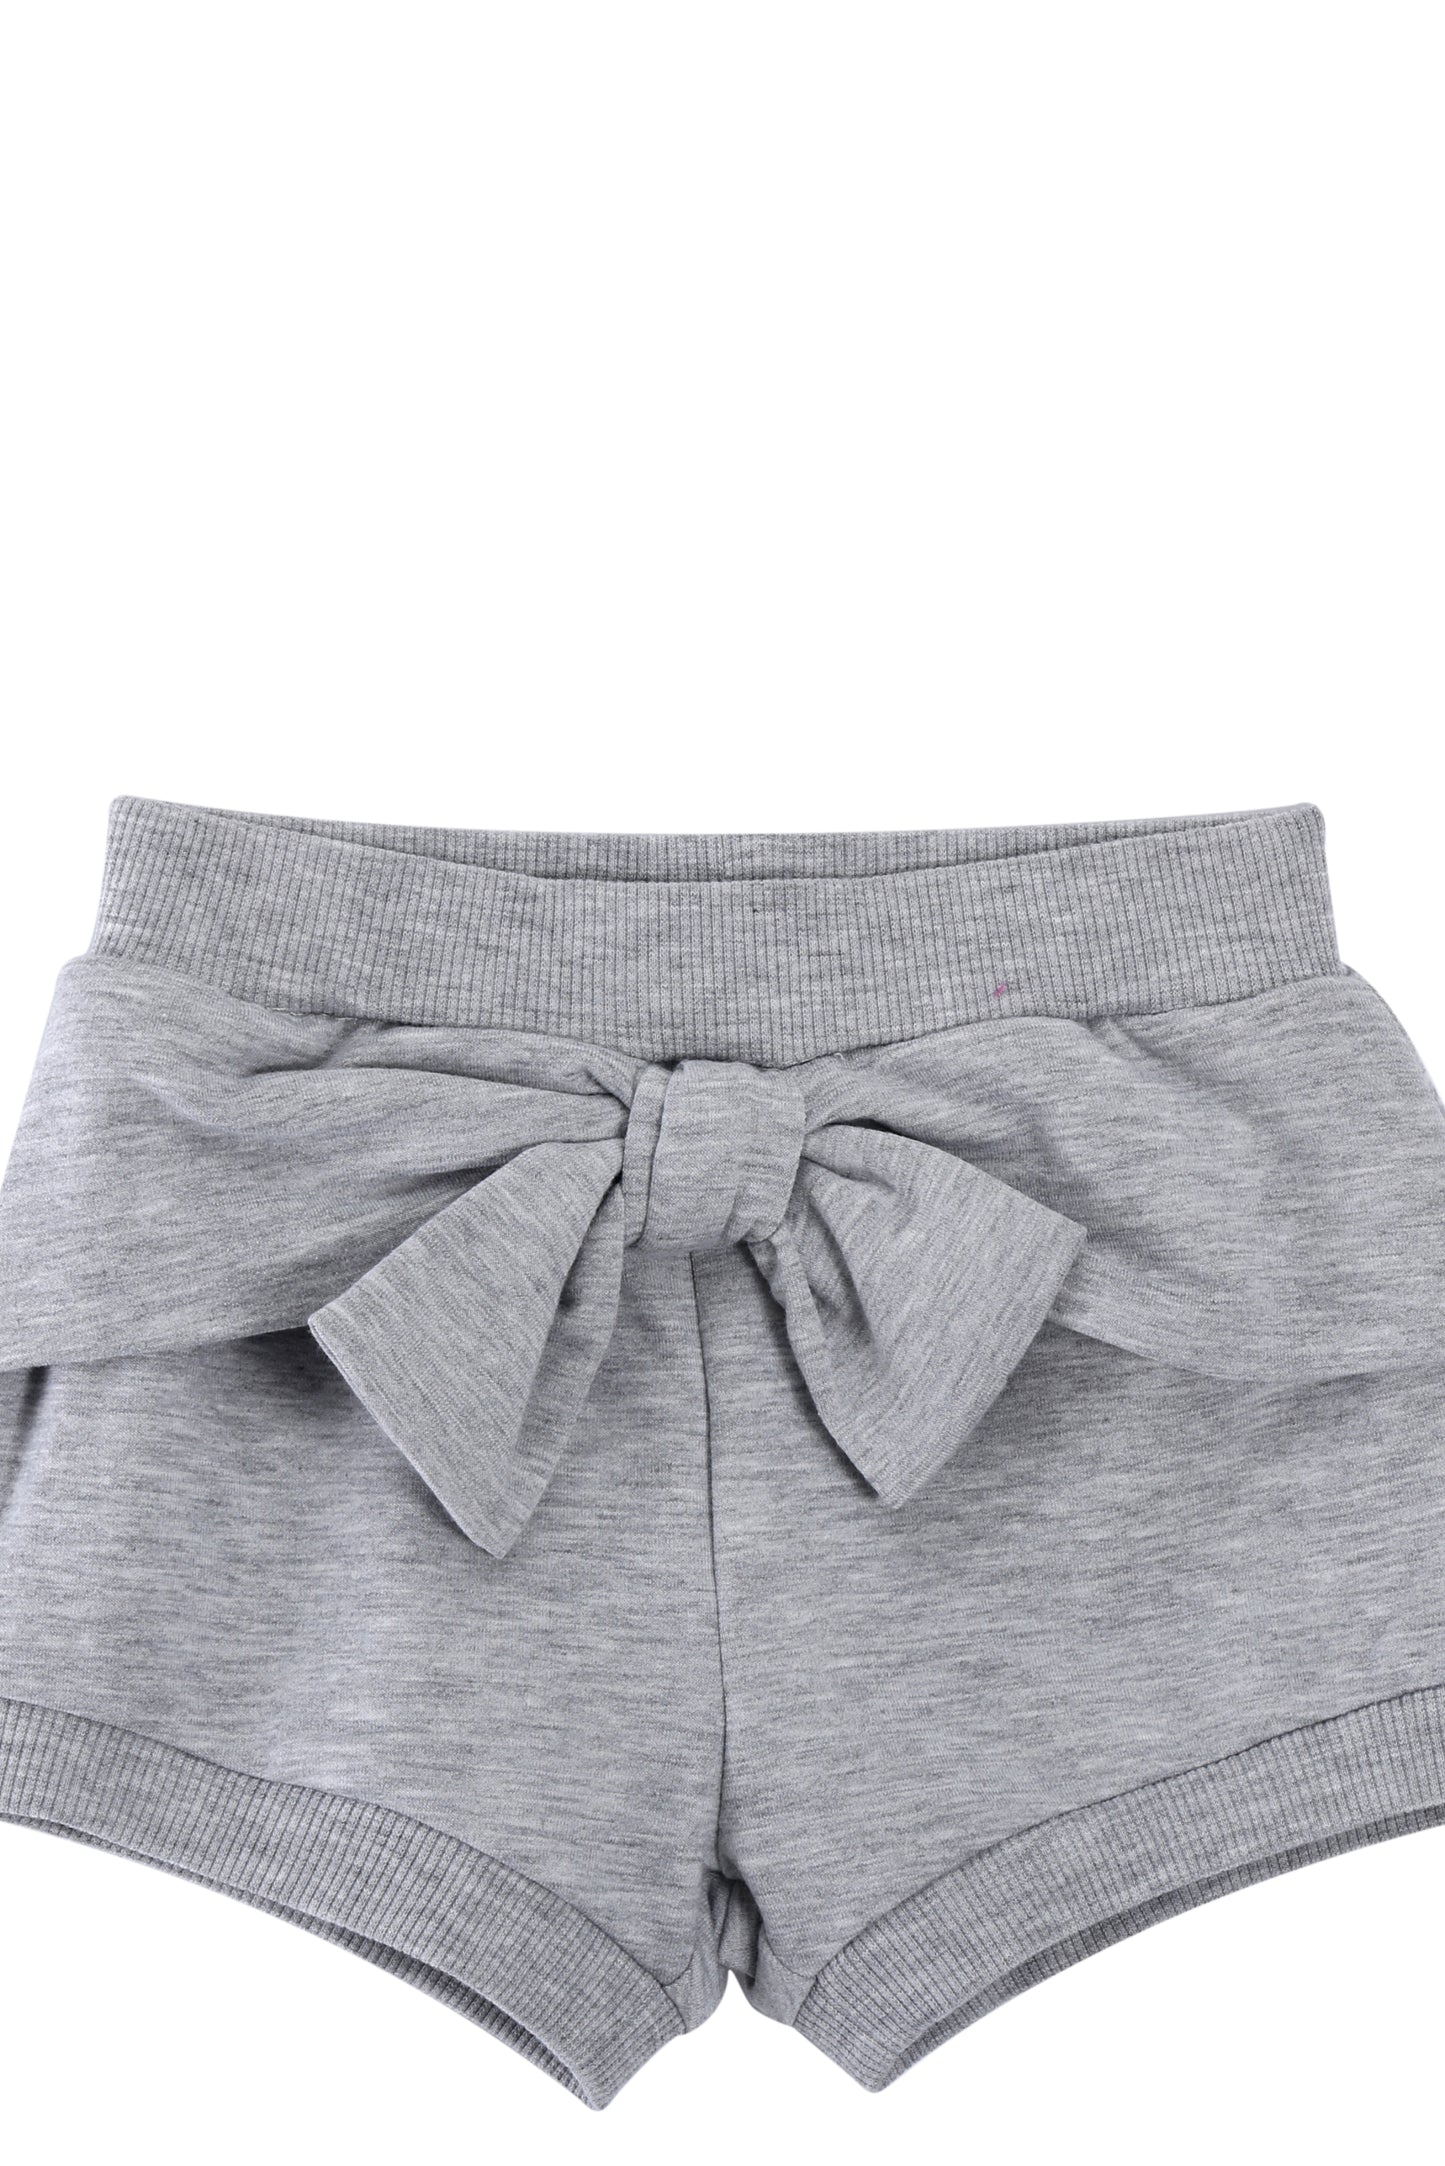 CLOSE UP OF LIGHT GREY FRENCH TERRY SWEAT SHORTS WITH A BOW